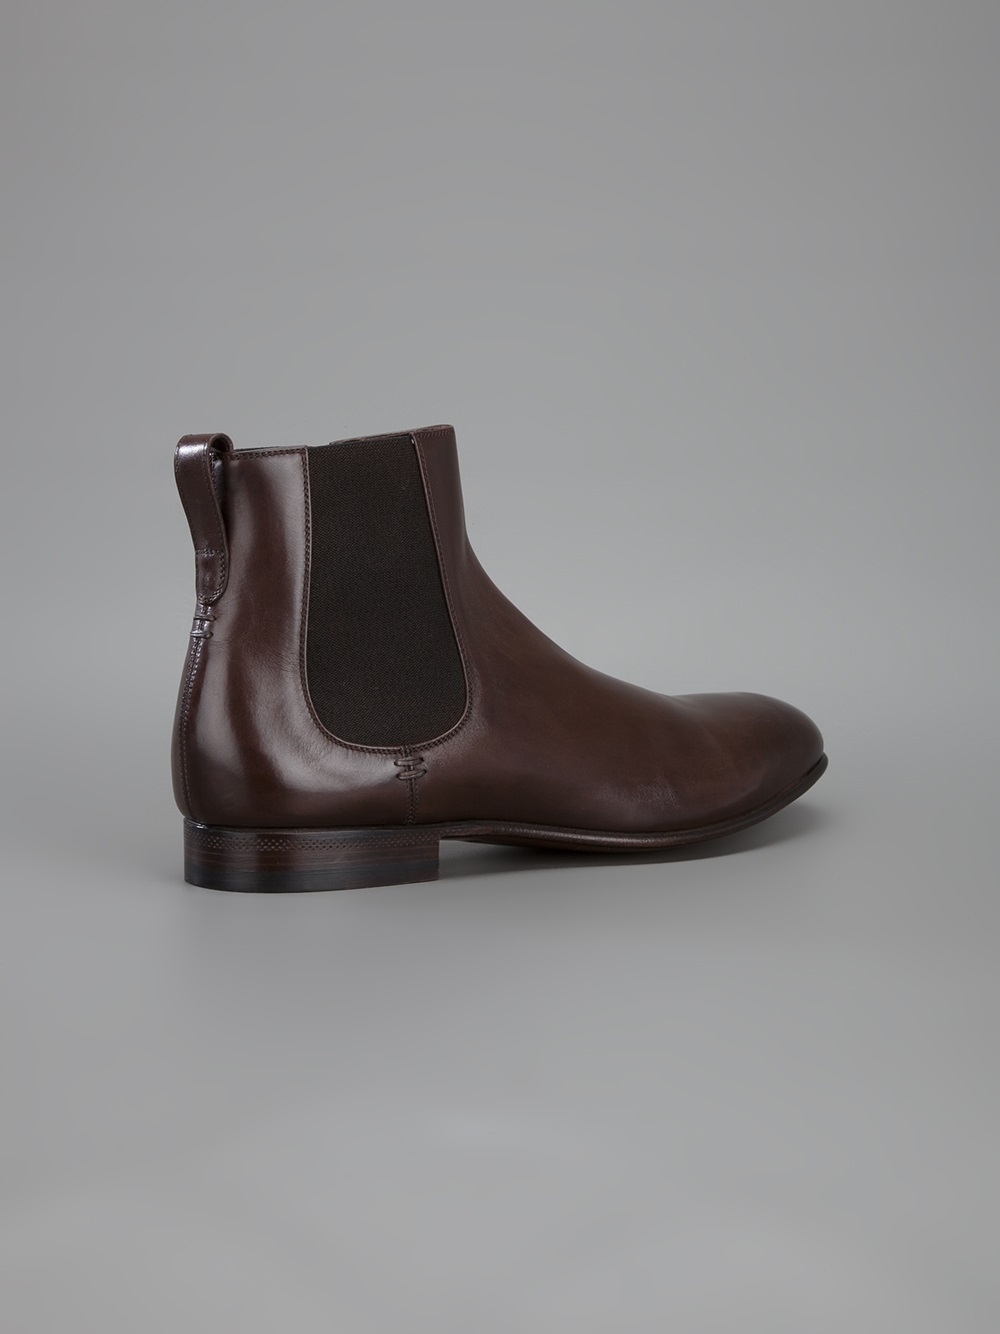 Lyst - Sergio rossi Ankle Boot in Brown for Men